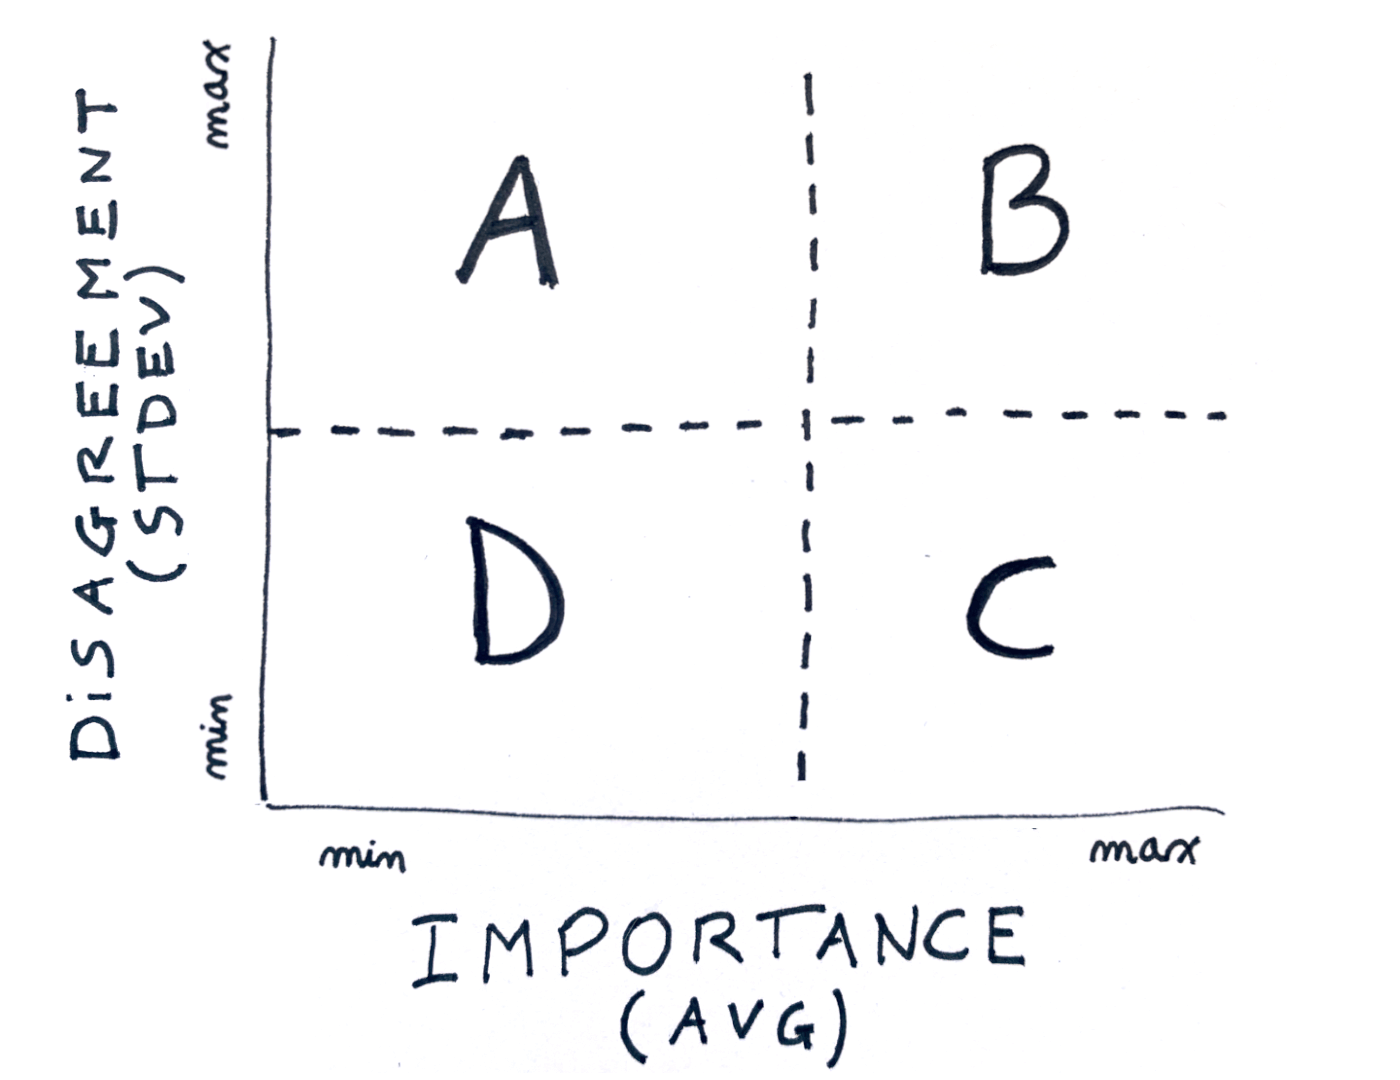 Sketch of a graph. On the left of the vertical axis the label "disagreement (stdev)". On the bottom of the horizontal axis the label "importance (avg)". The graph is subdivided into four quadrants. Starting from top-left and moving clockwise are the following labels: A, B, C, D.